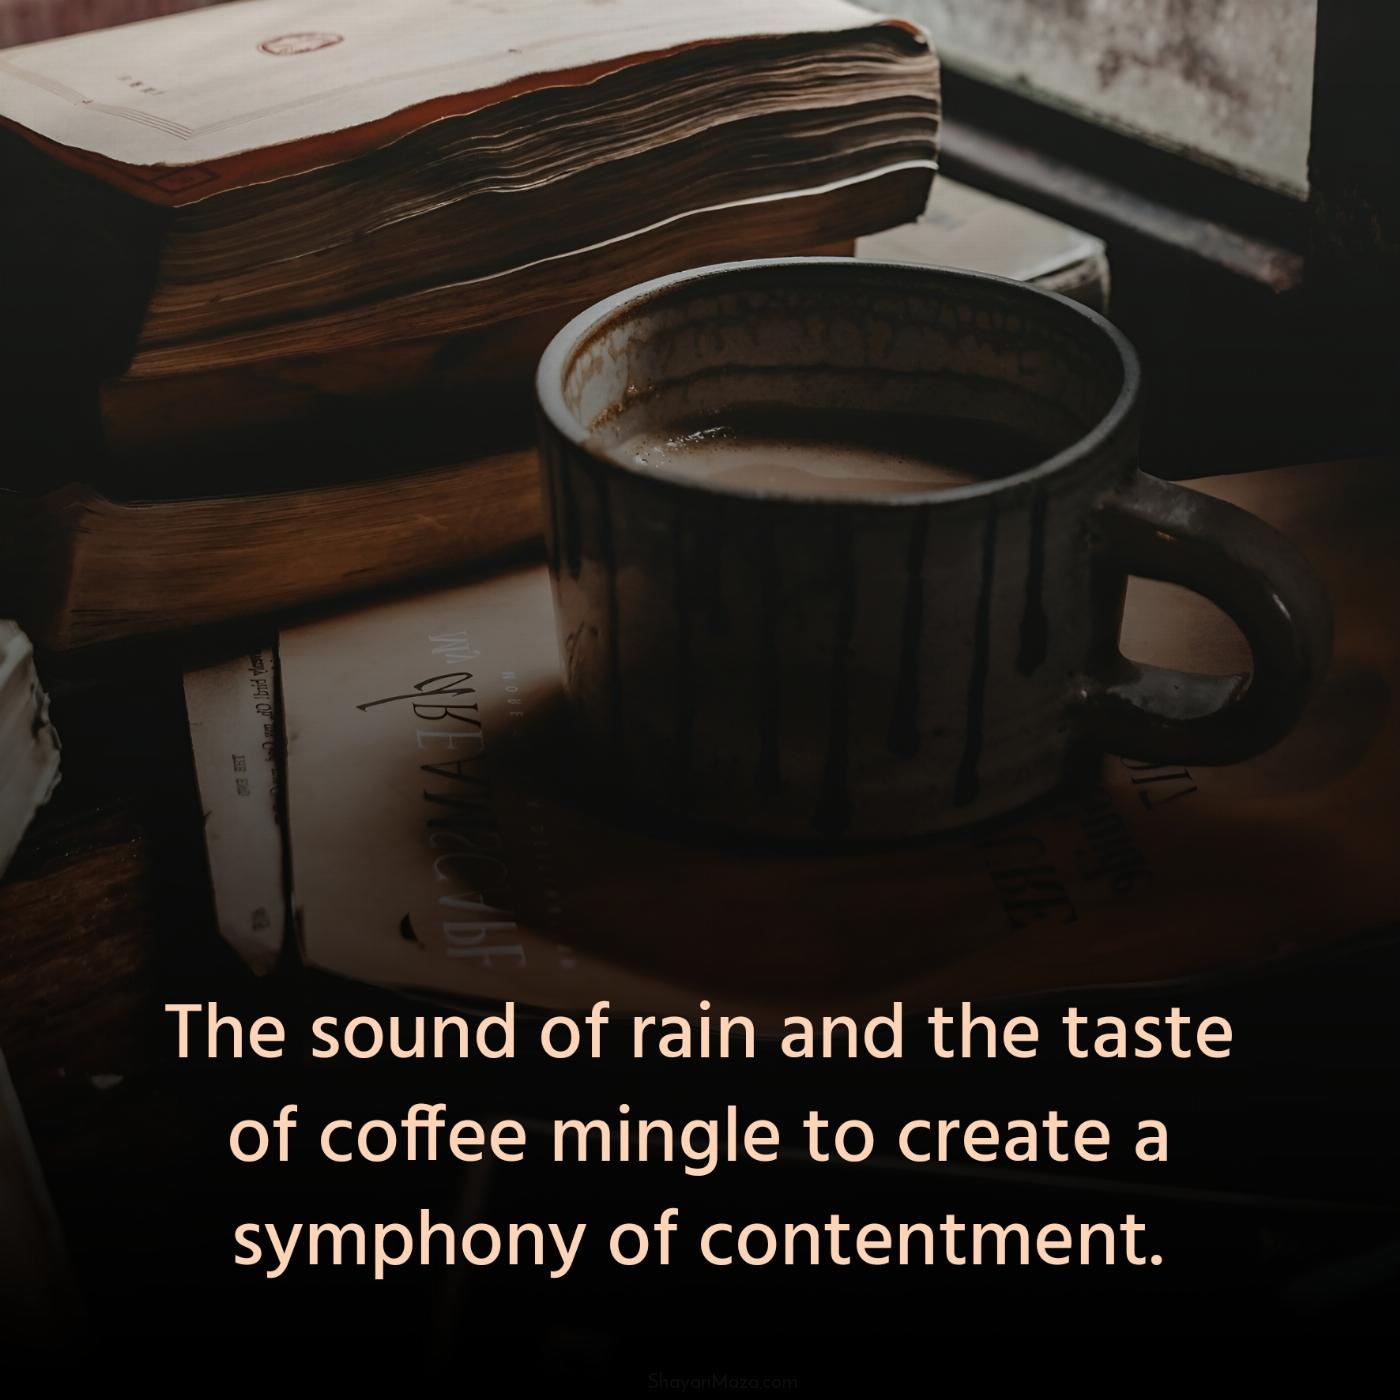 The sound of rain and the taste of coffee mingle to create a symphony